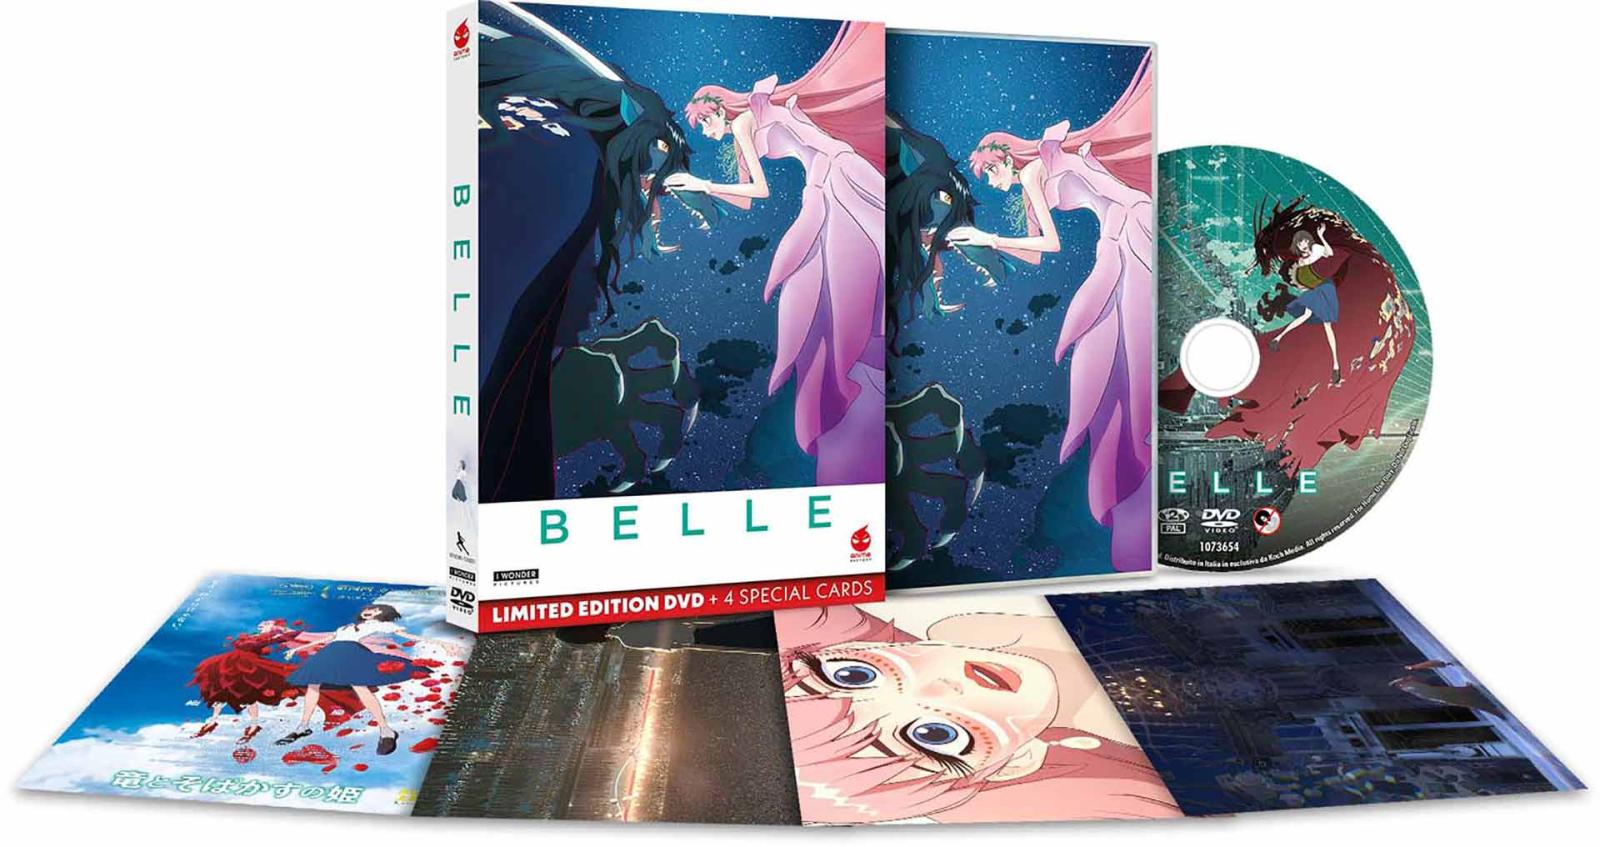 Belle - Limited Edition DVD + 4 Special Cards (DVD) Image 2